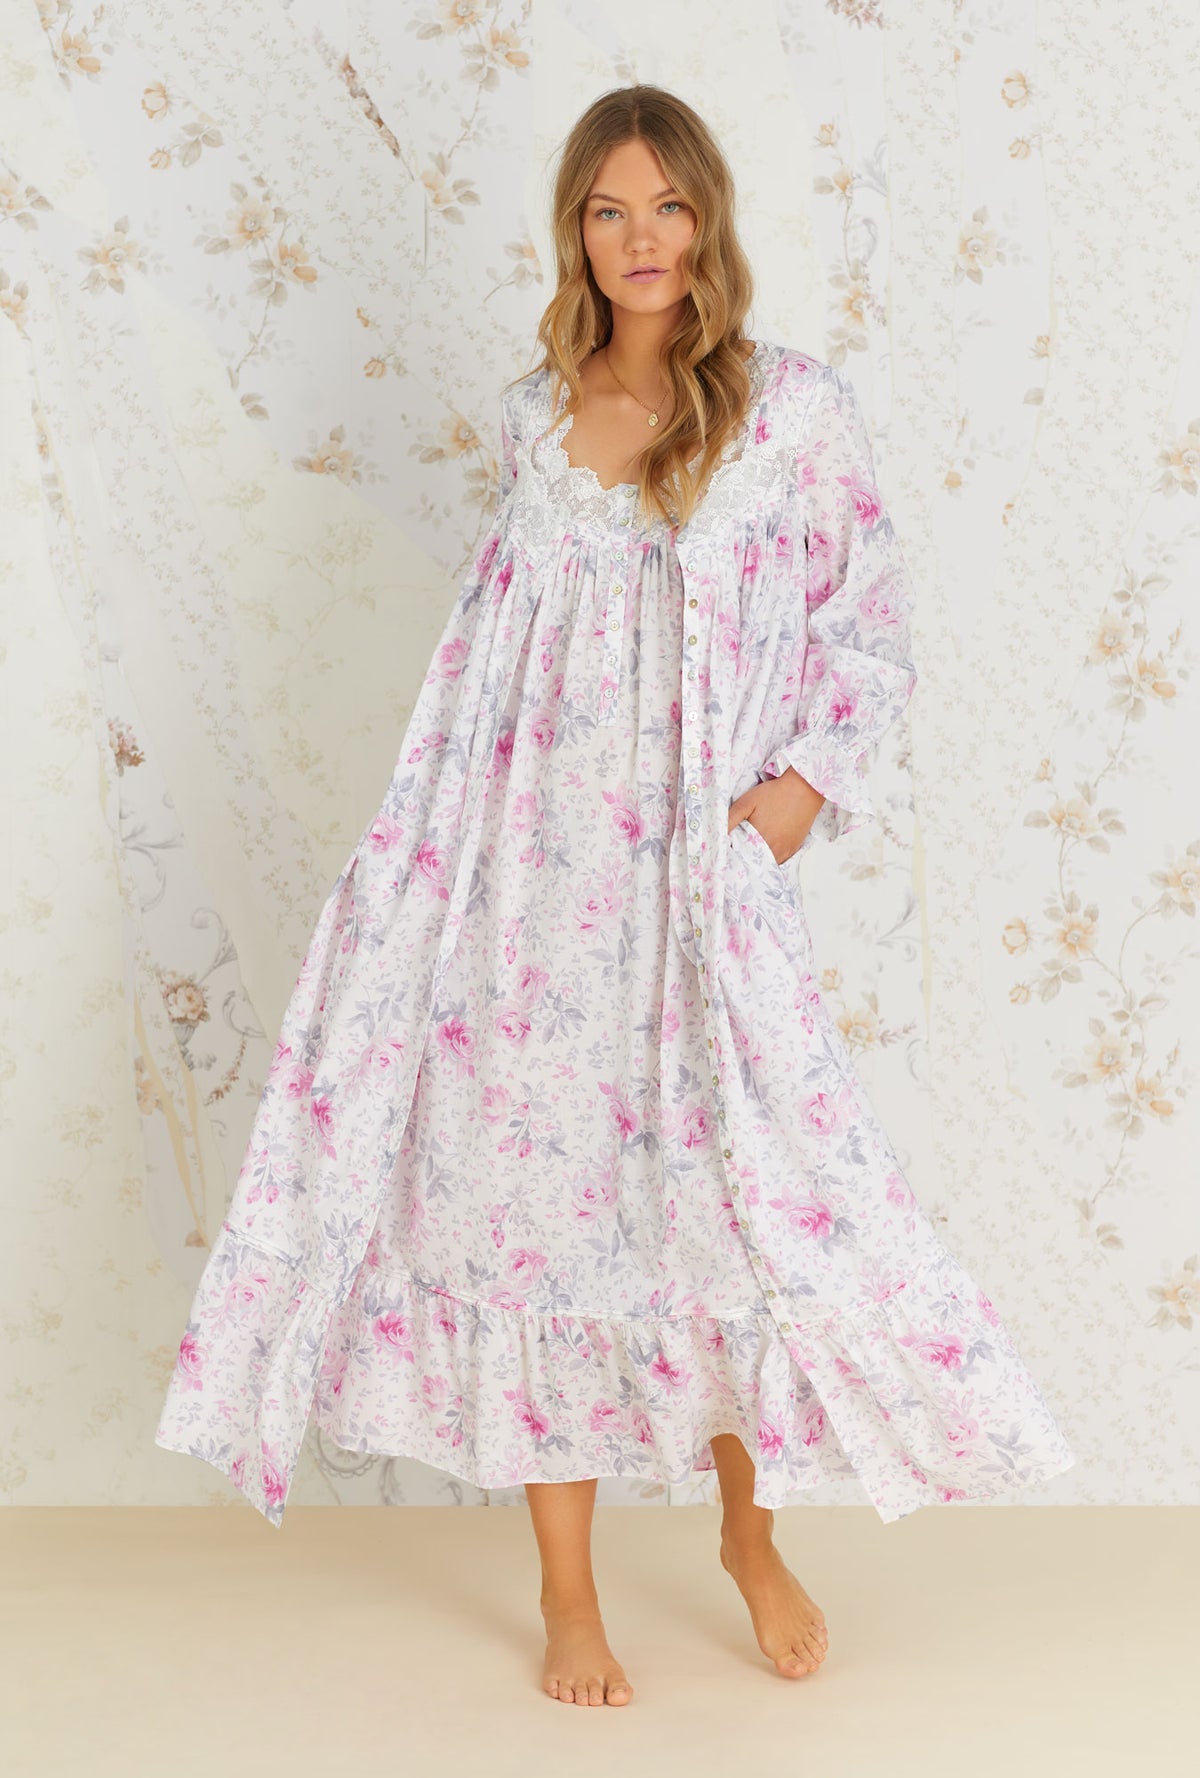 A lady wearing white long sleeve cotton button front robe with mendocino rose print.